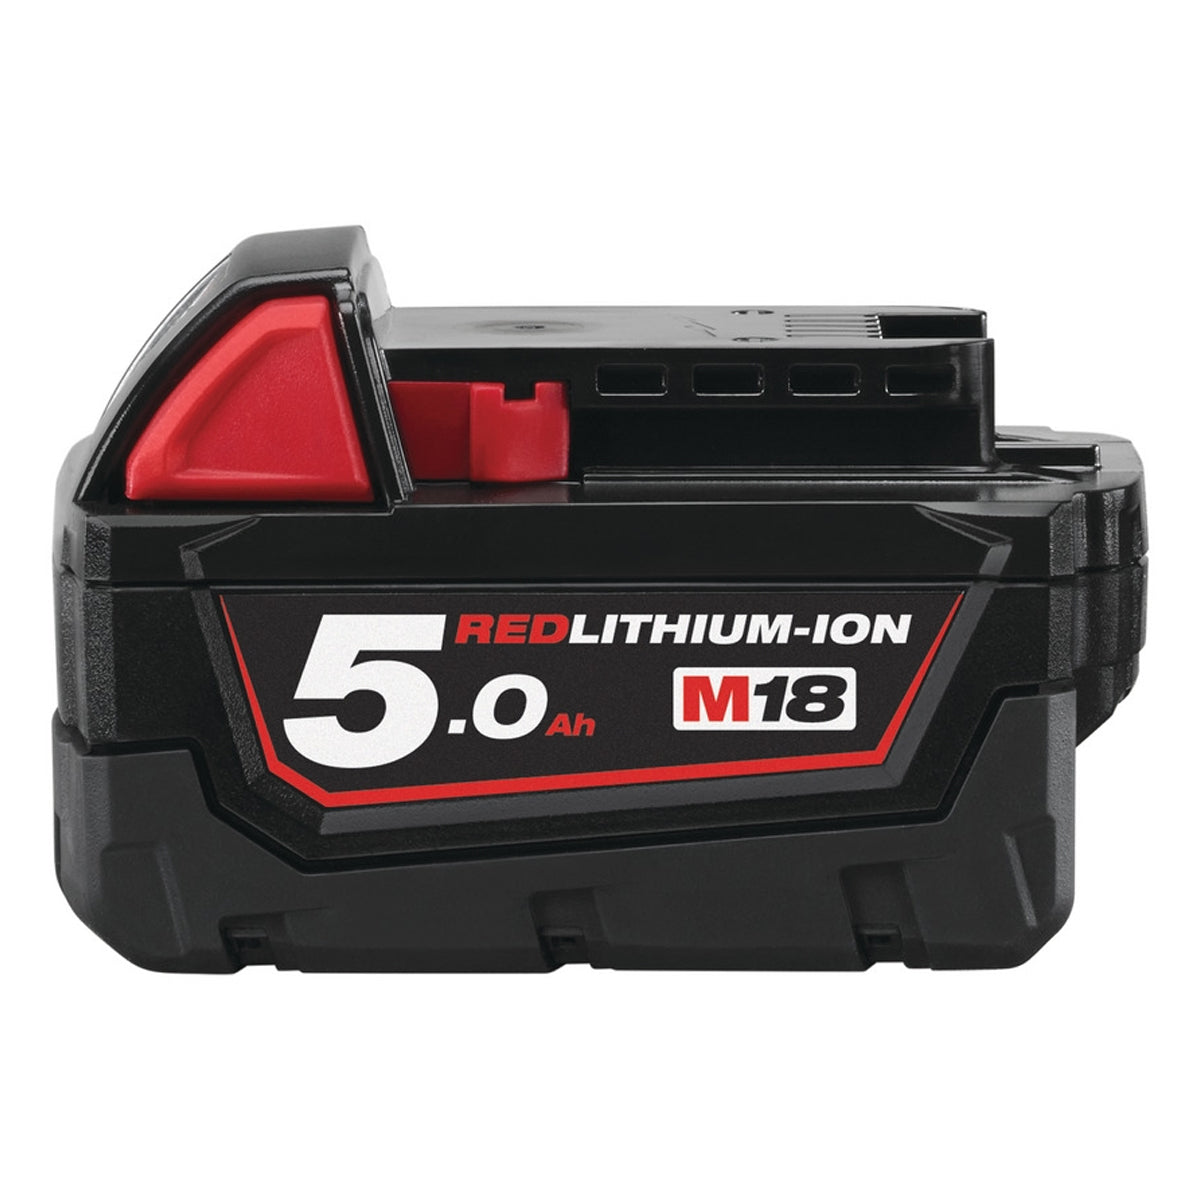 Milwaukee M18B5 18V Red Lithium-ion 5.0Ah Battery 4932430483